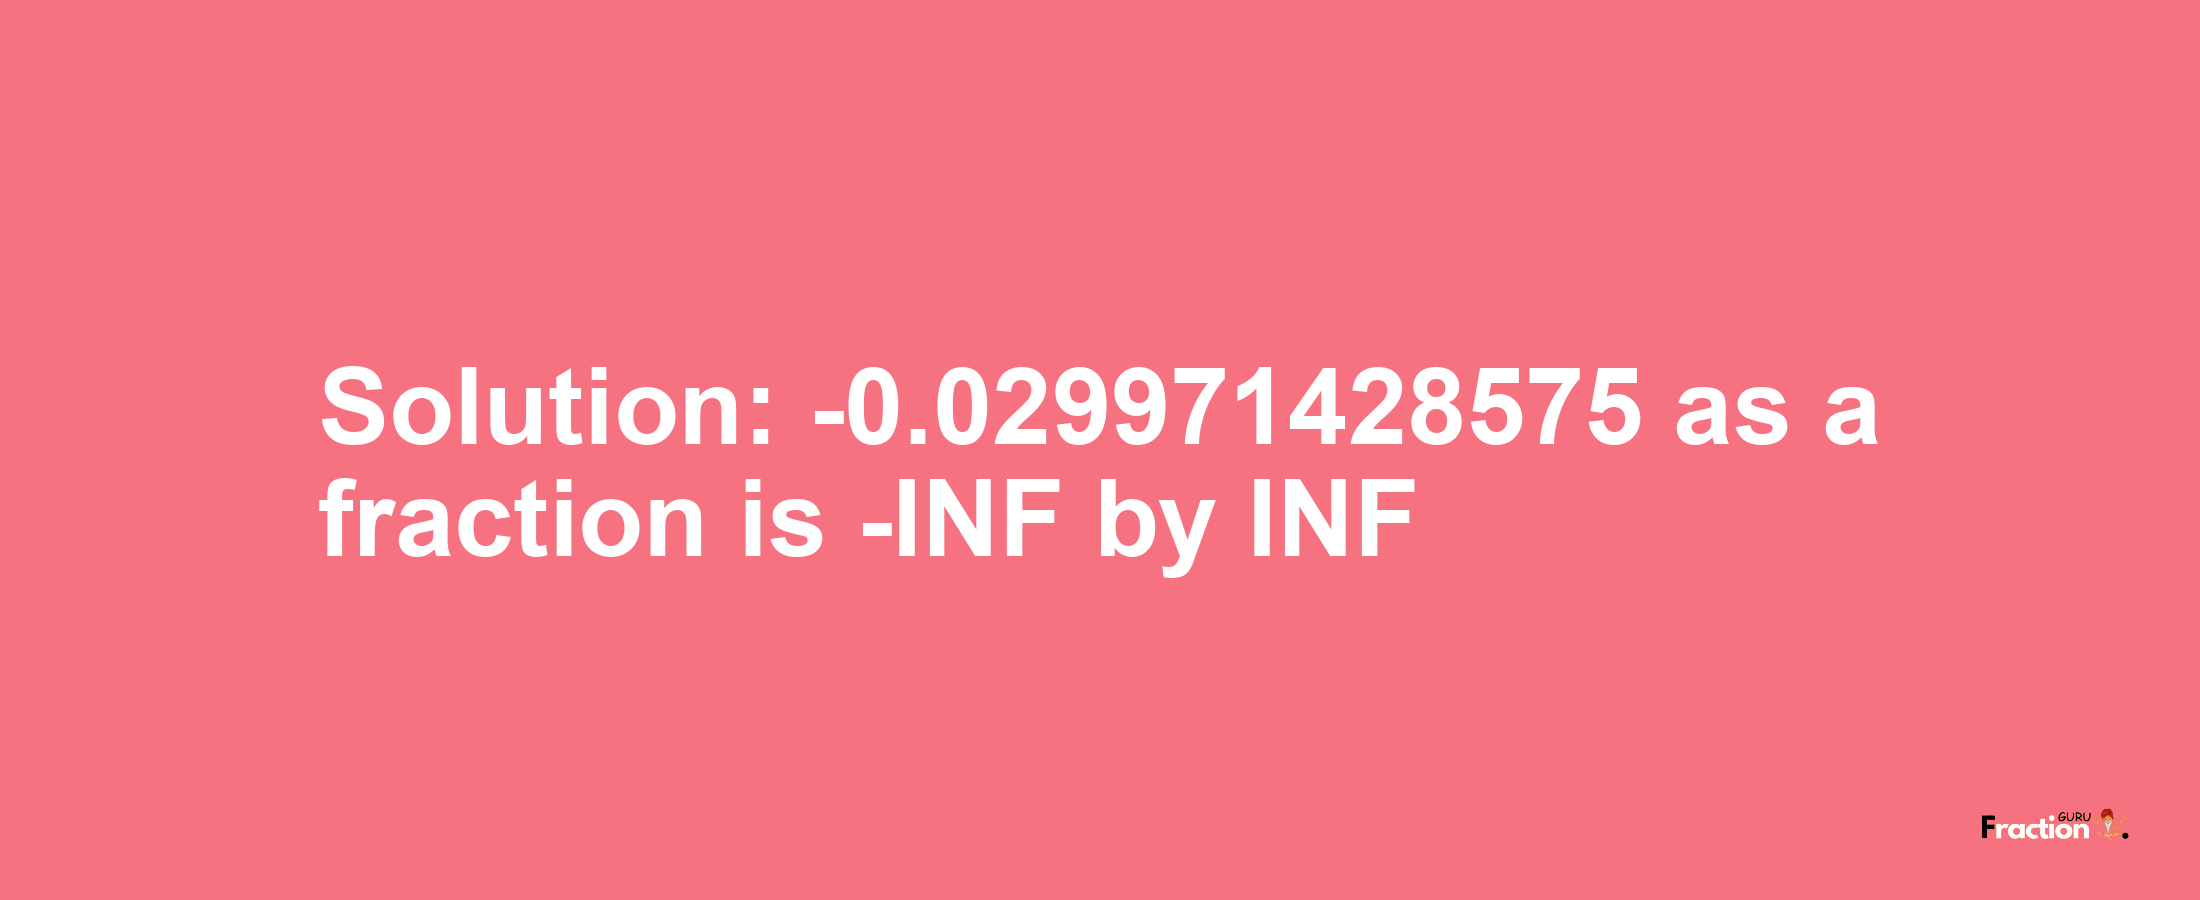 Solution:-0.029971428575 as a fraction is -INF/INF